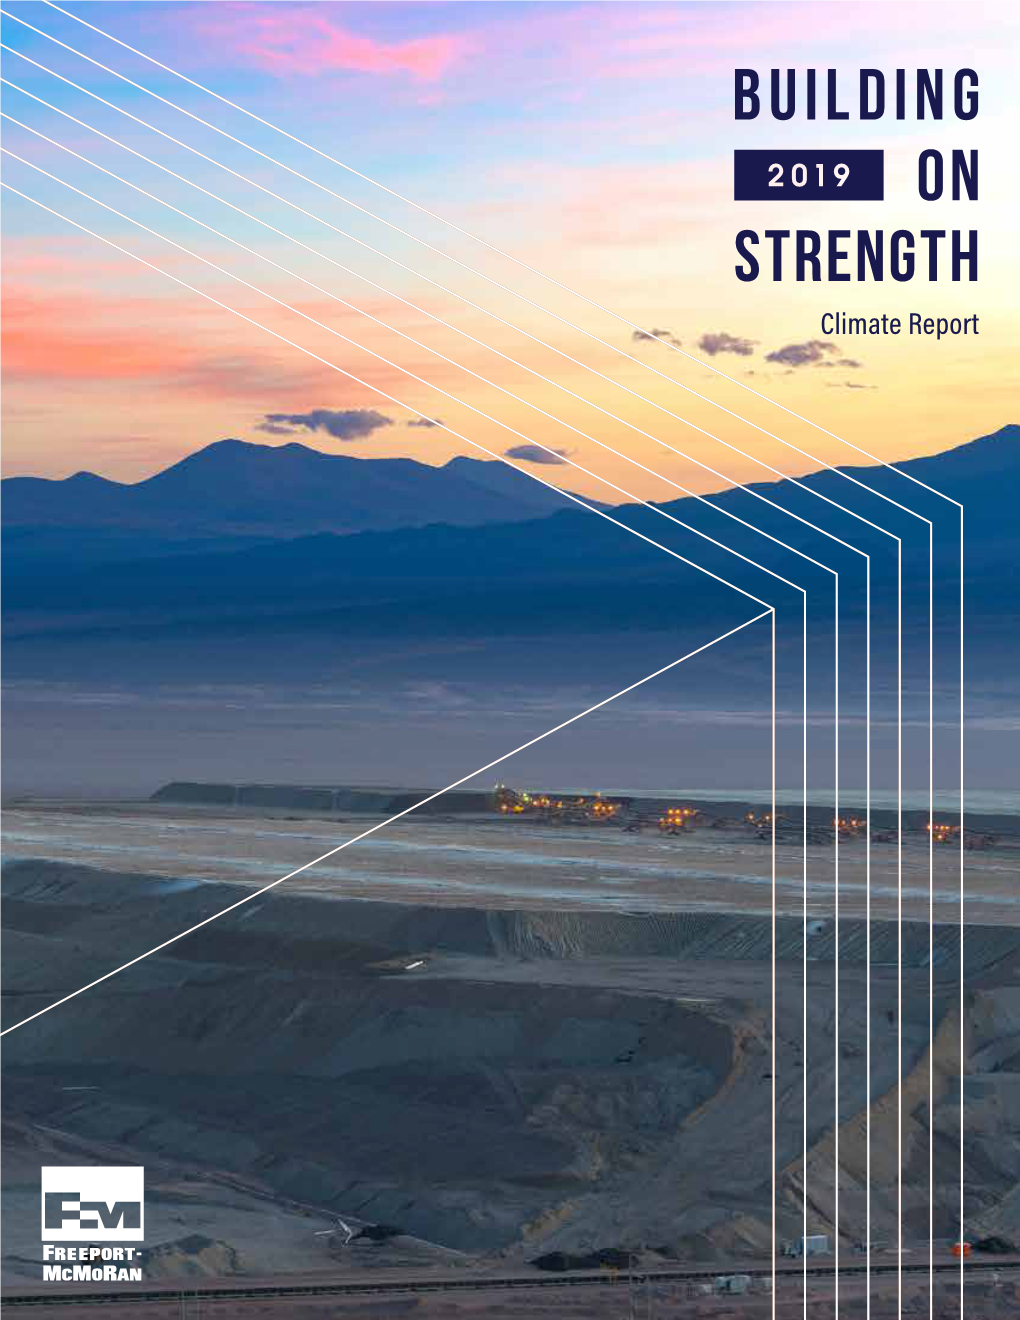 BUILDING on STRENGTH Climate Report